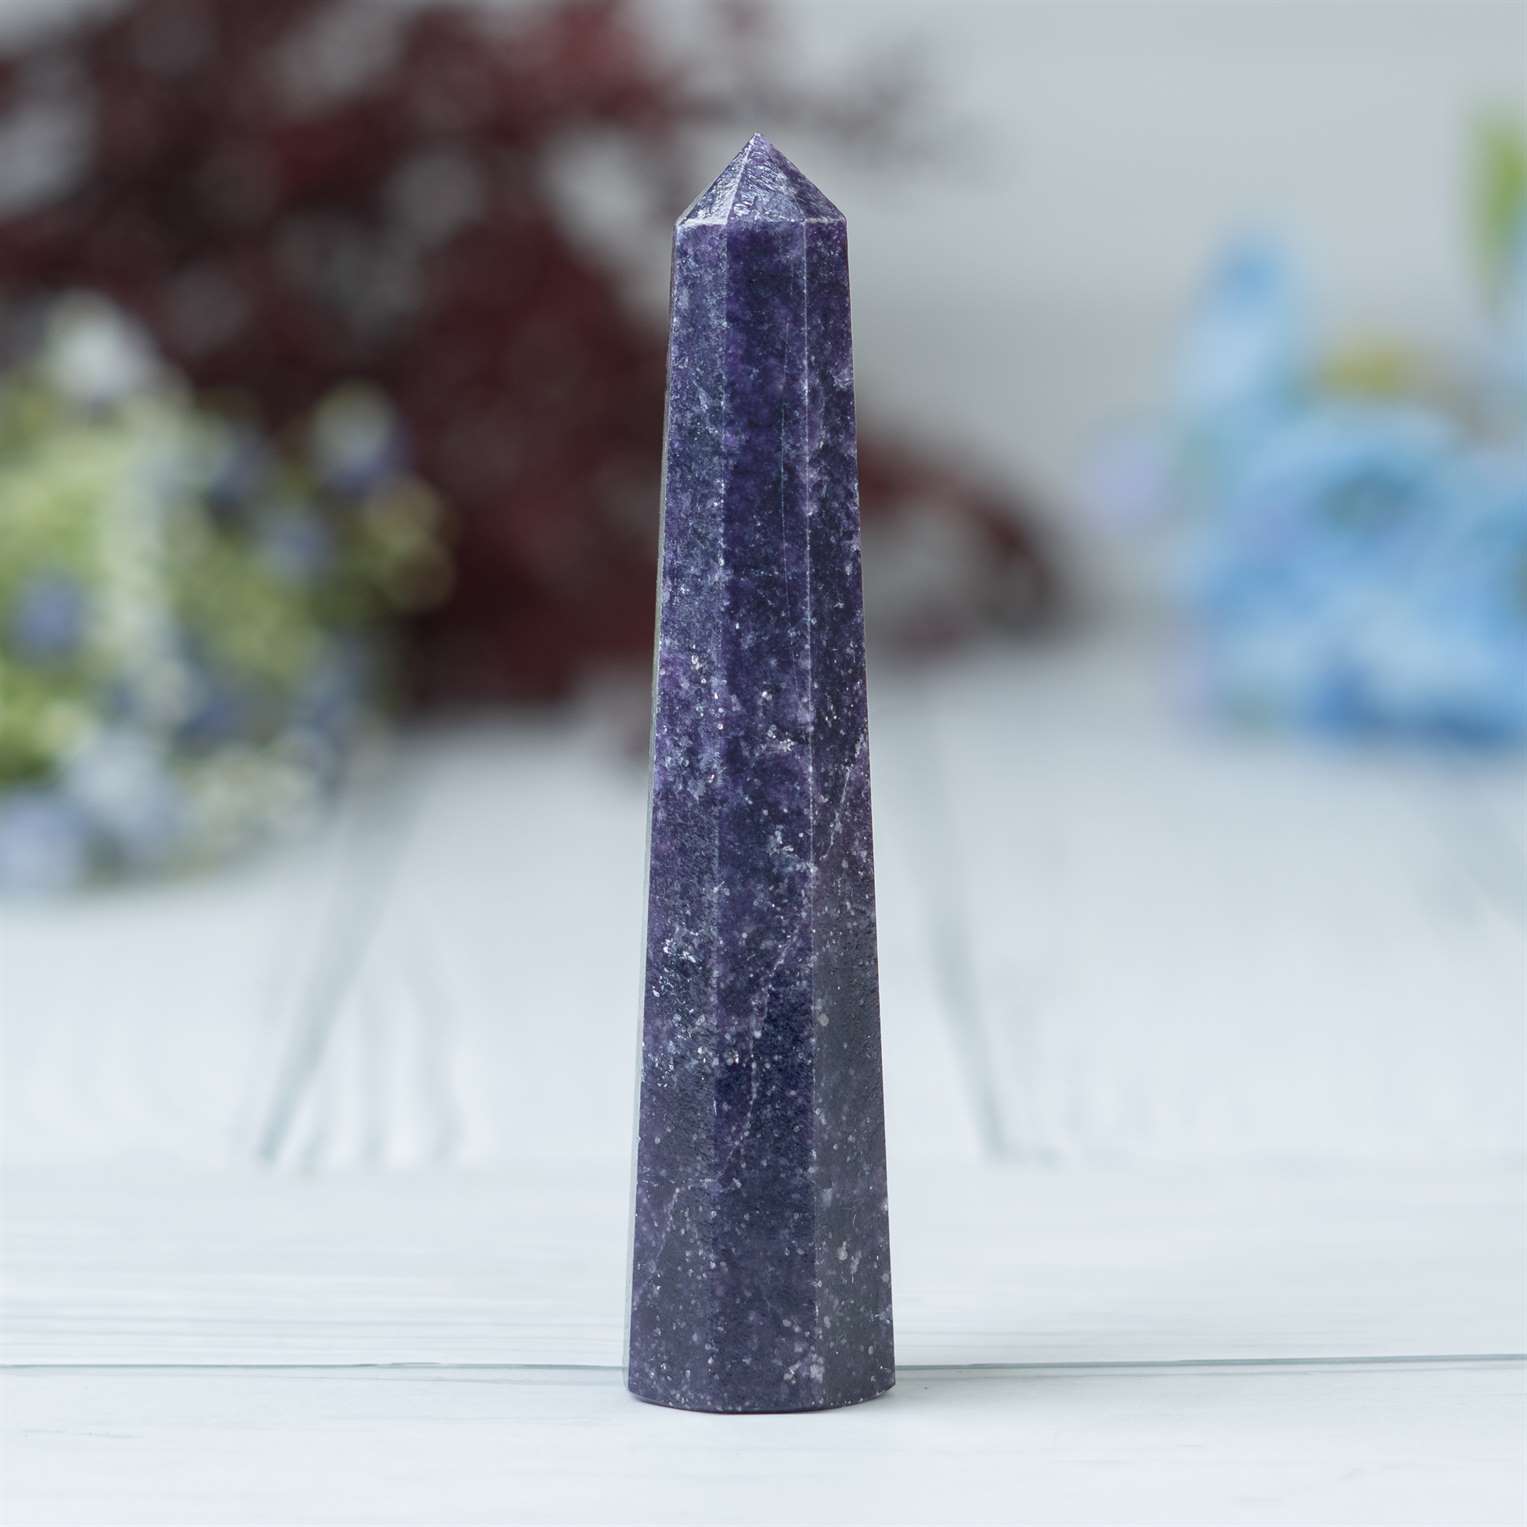 Lepidolite Healing Crystal Wand - For Manifestation, Massage, and Energy Work - TheIndianHand